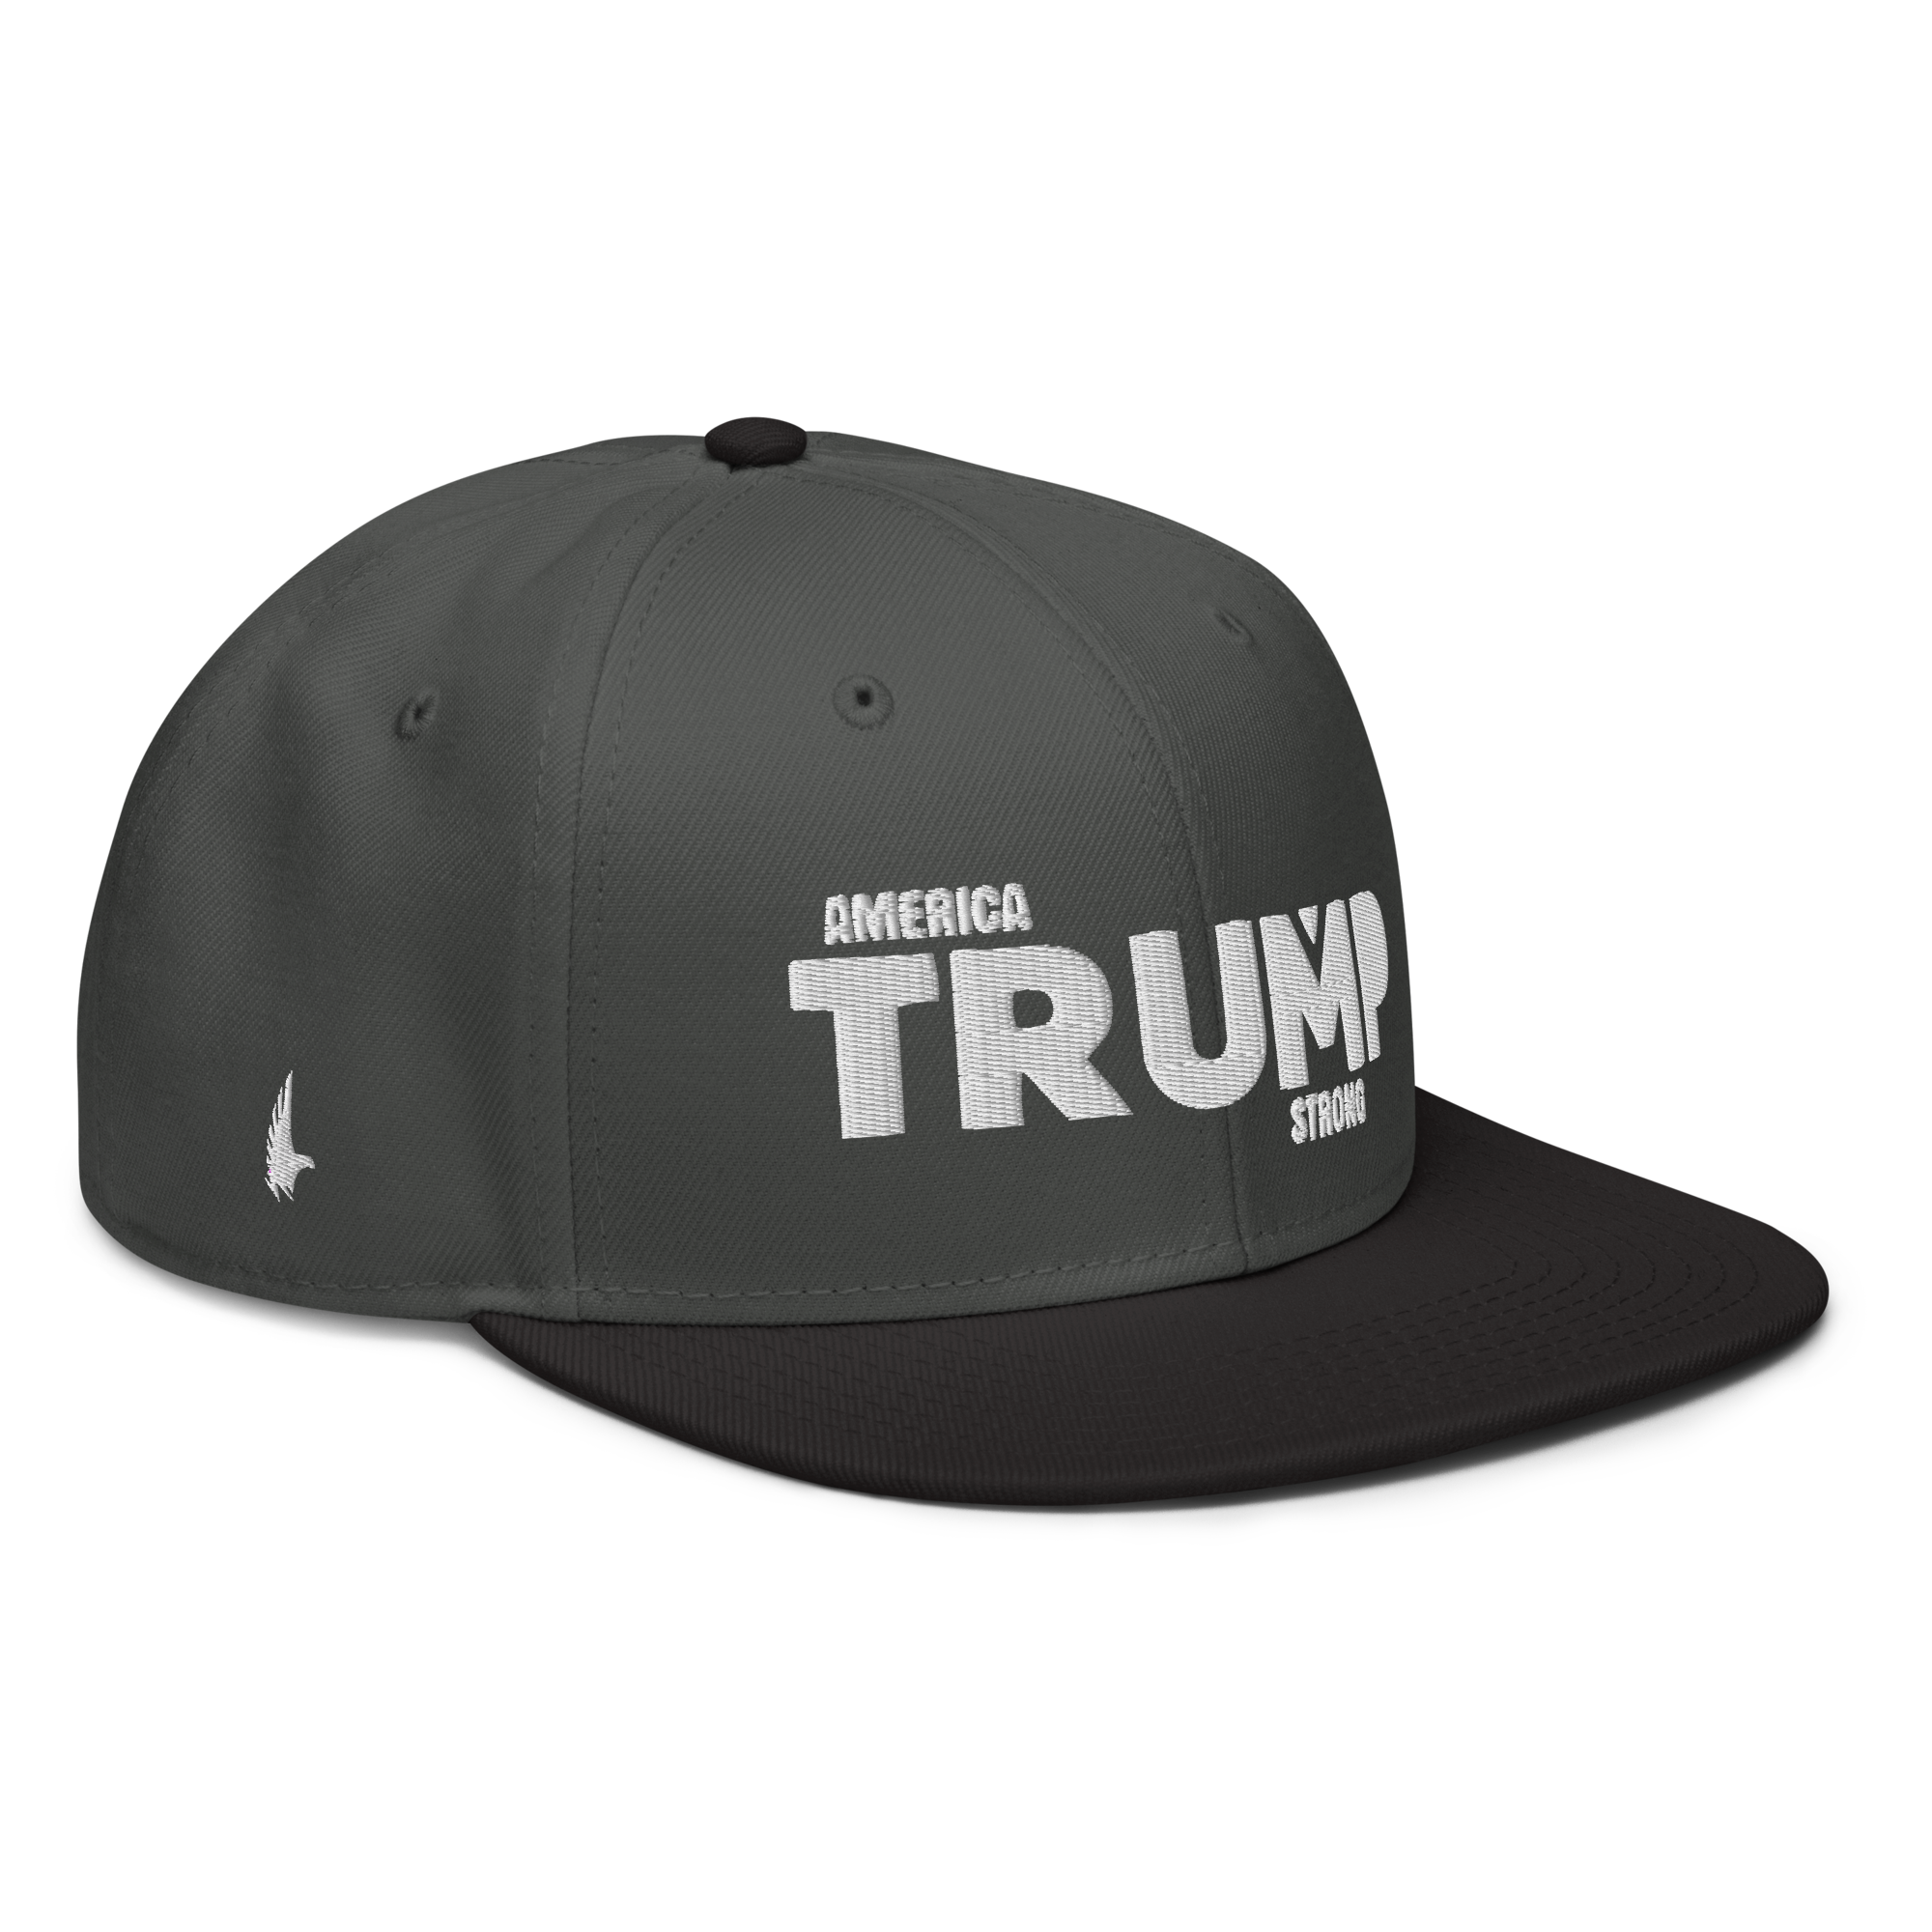 Loyalty Vibes America Trump Strong Snapback Hat Charcoal Grey White Black One size - Loyalty Vibes